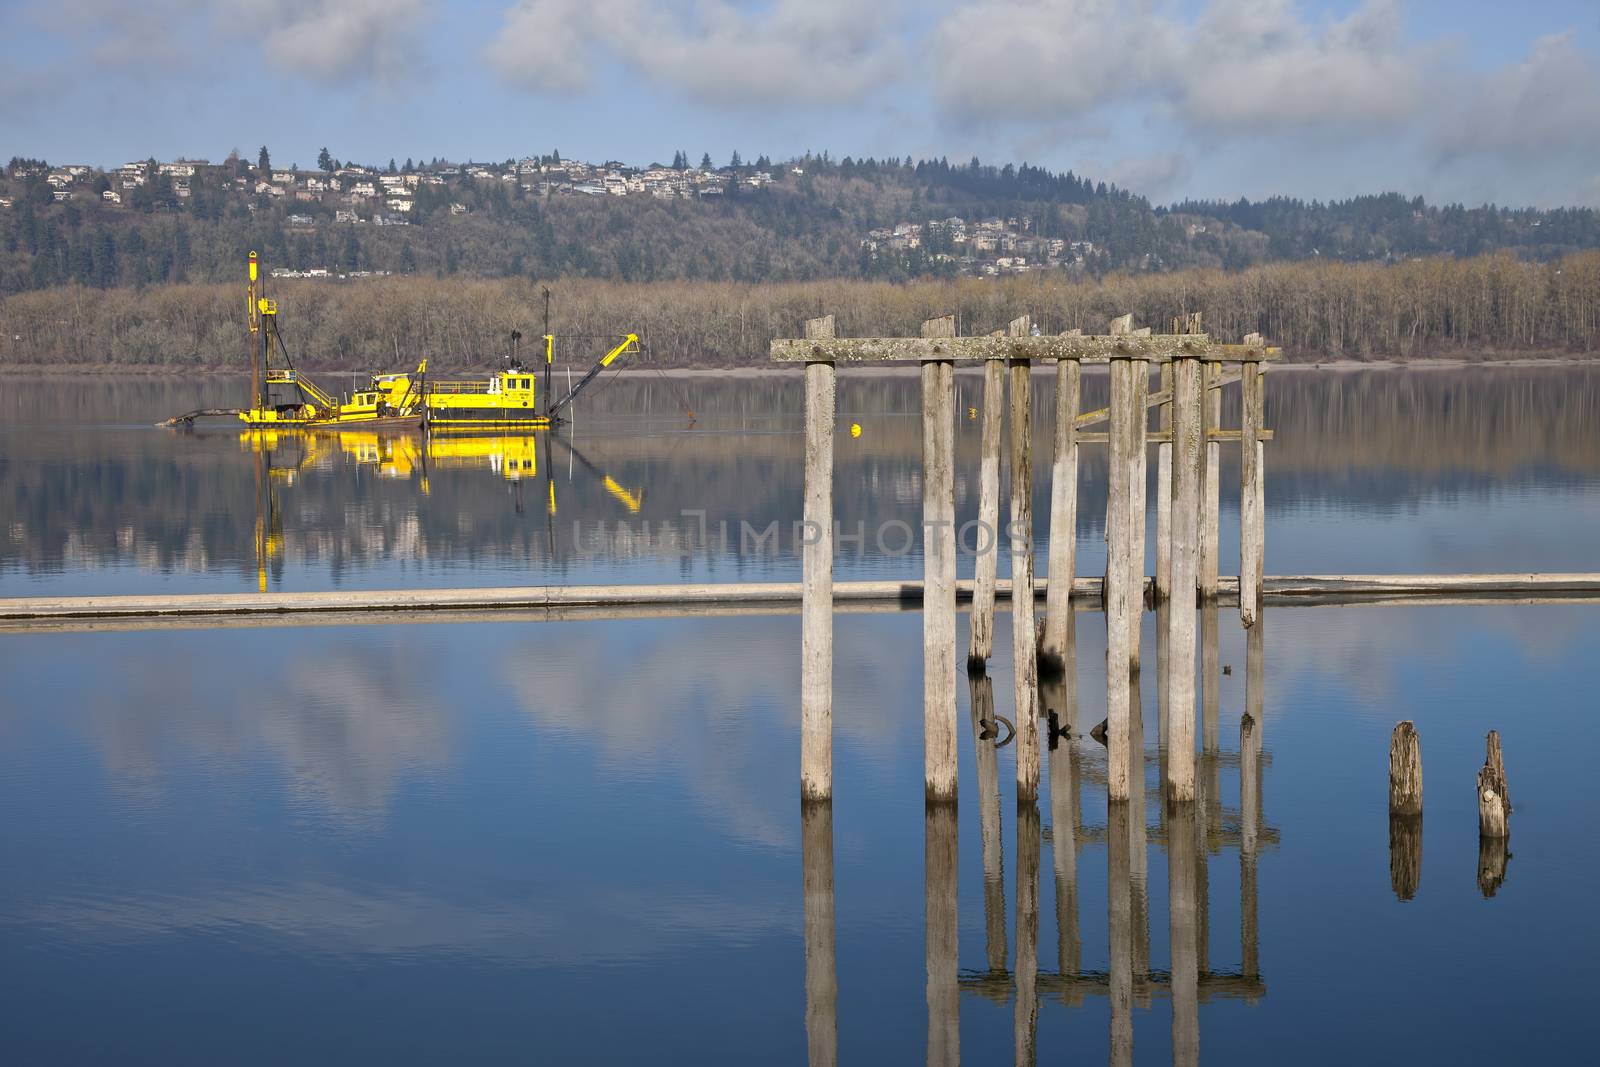 Dredging boats in the Columbia River. by Rigucci